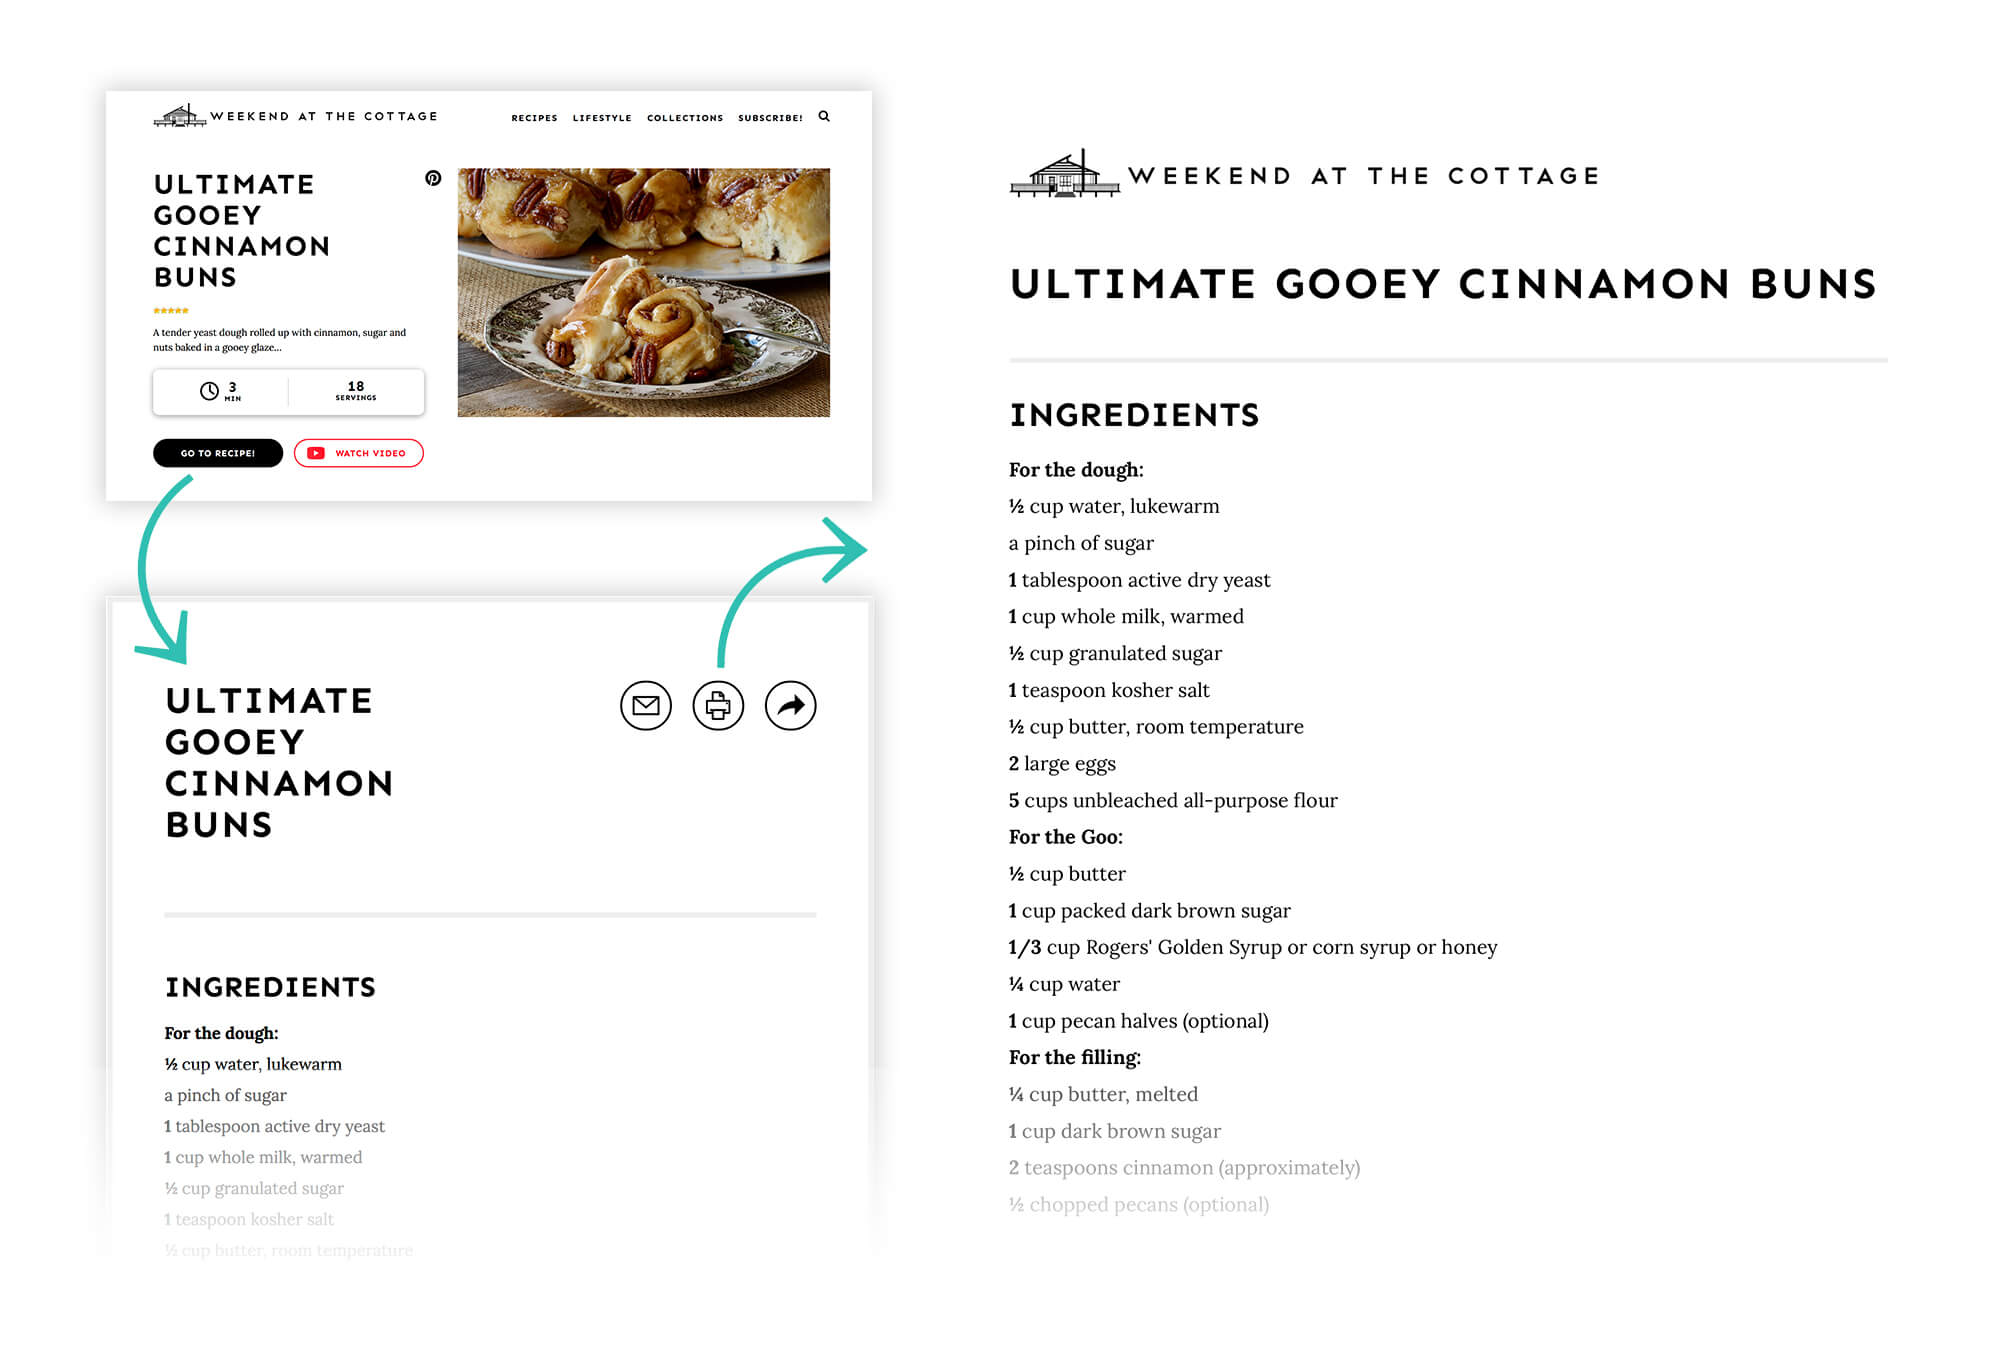 User flow of website following a recipe to ingredients with instructions with the option to print.